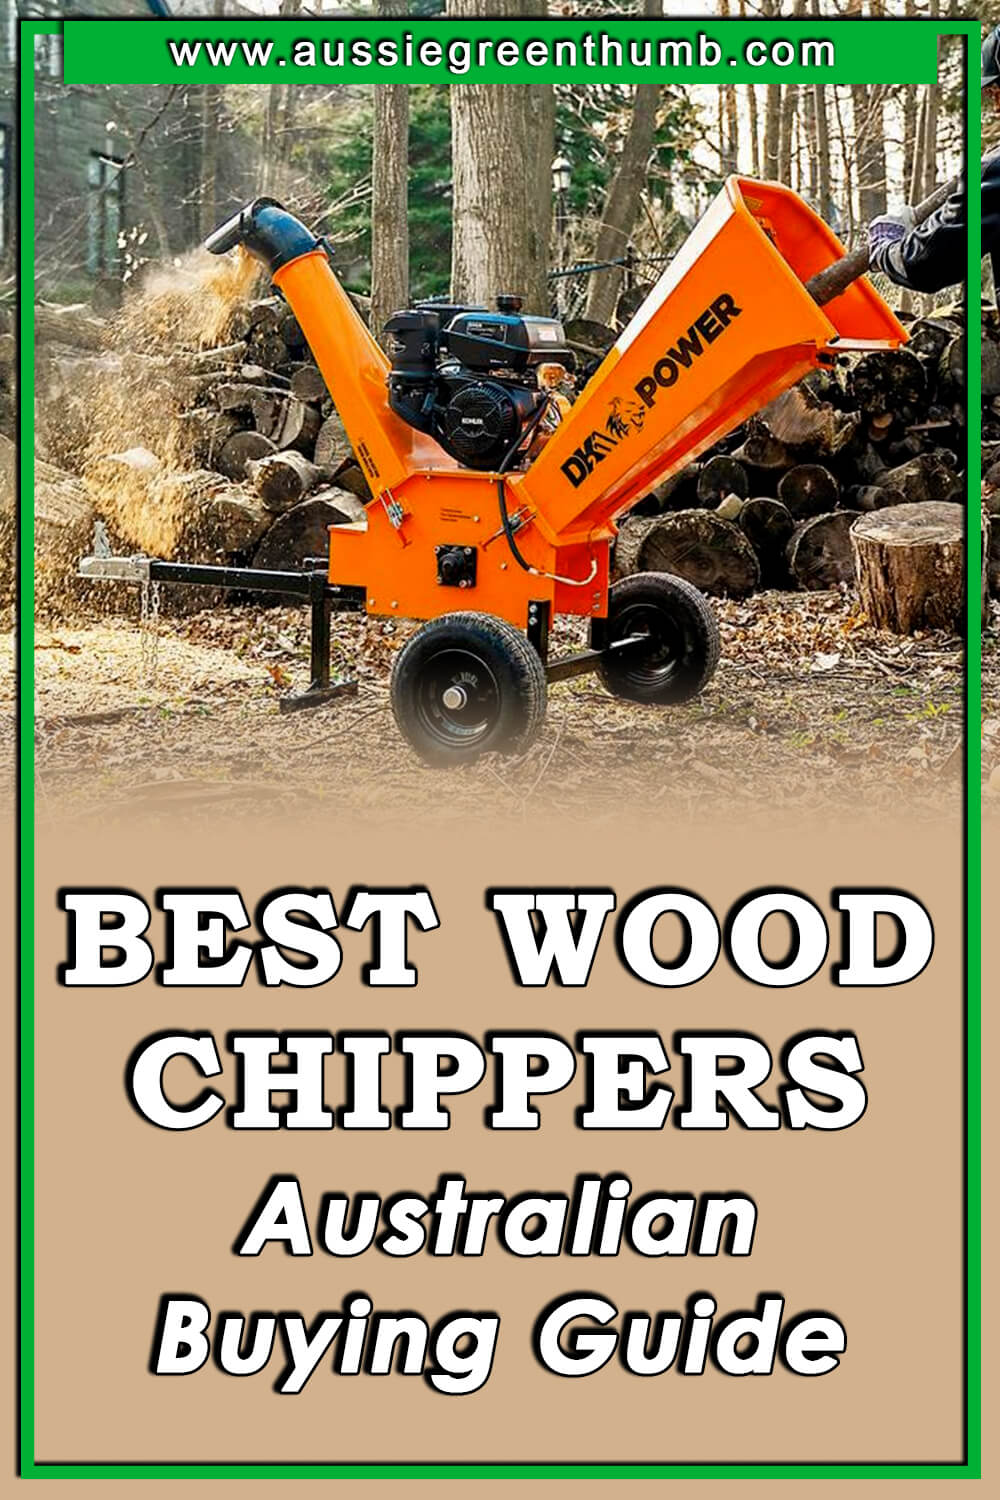 Best Wood Chippers Australian Buying Guide